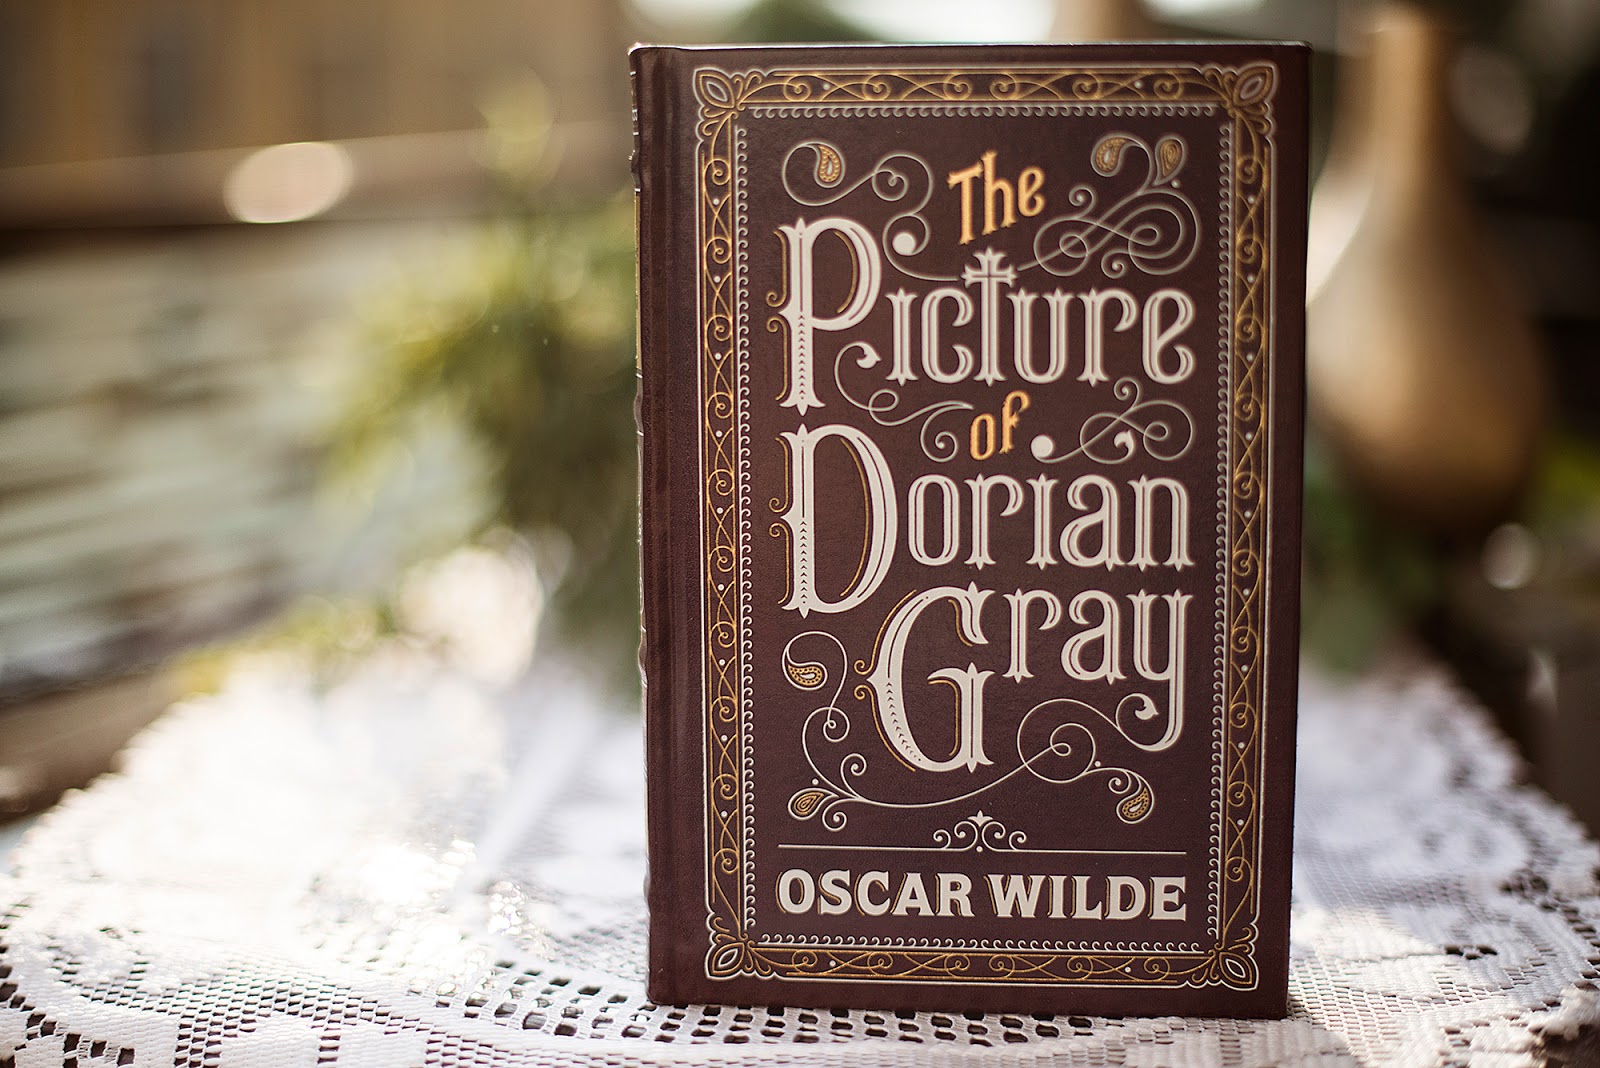 You got: The Picture of Dorian Gray! Eat a Dessert for Each of These Letters 🧁 and We’ll Give You a Good Book to Dive into 📚